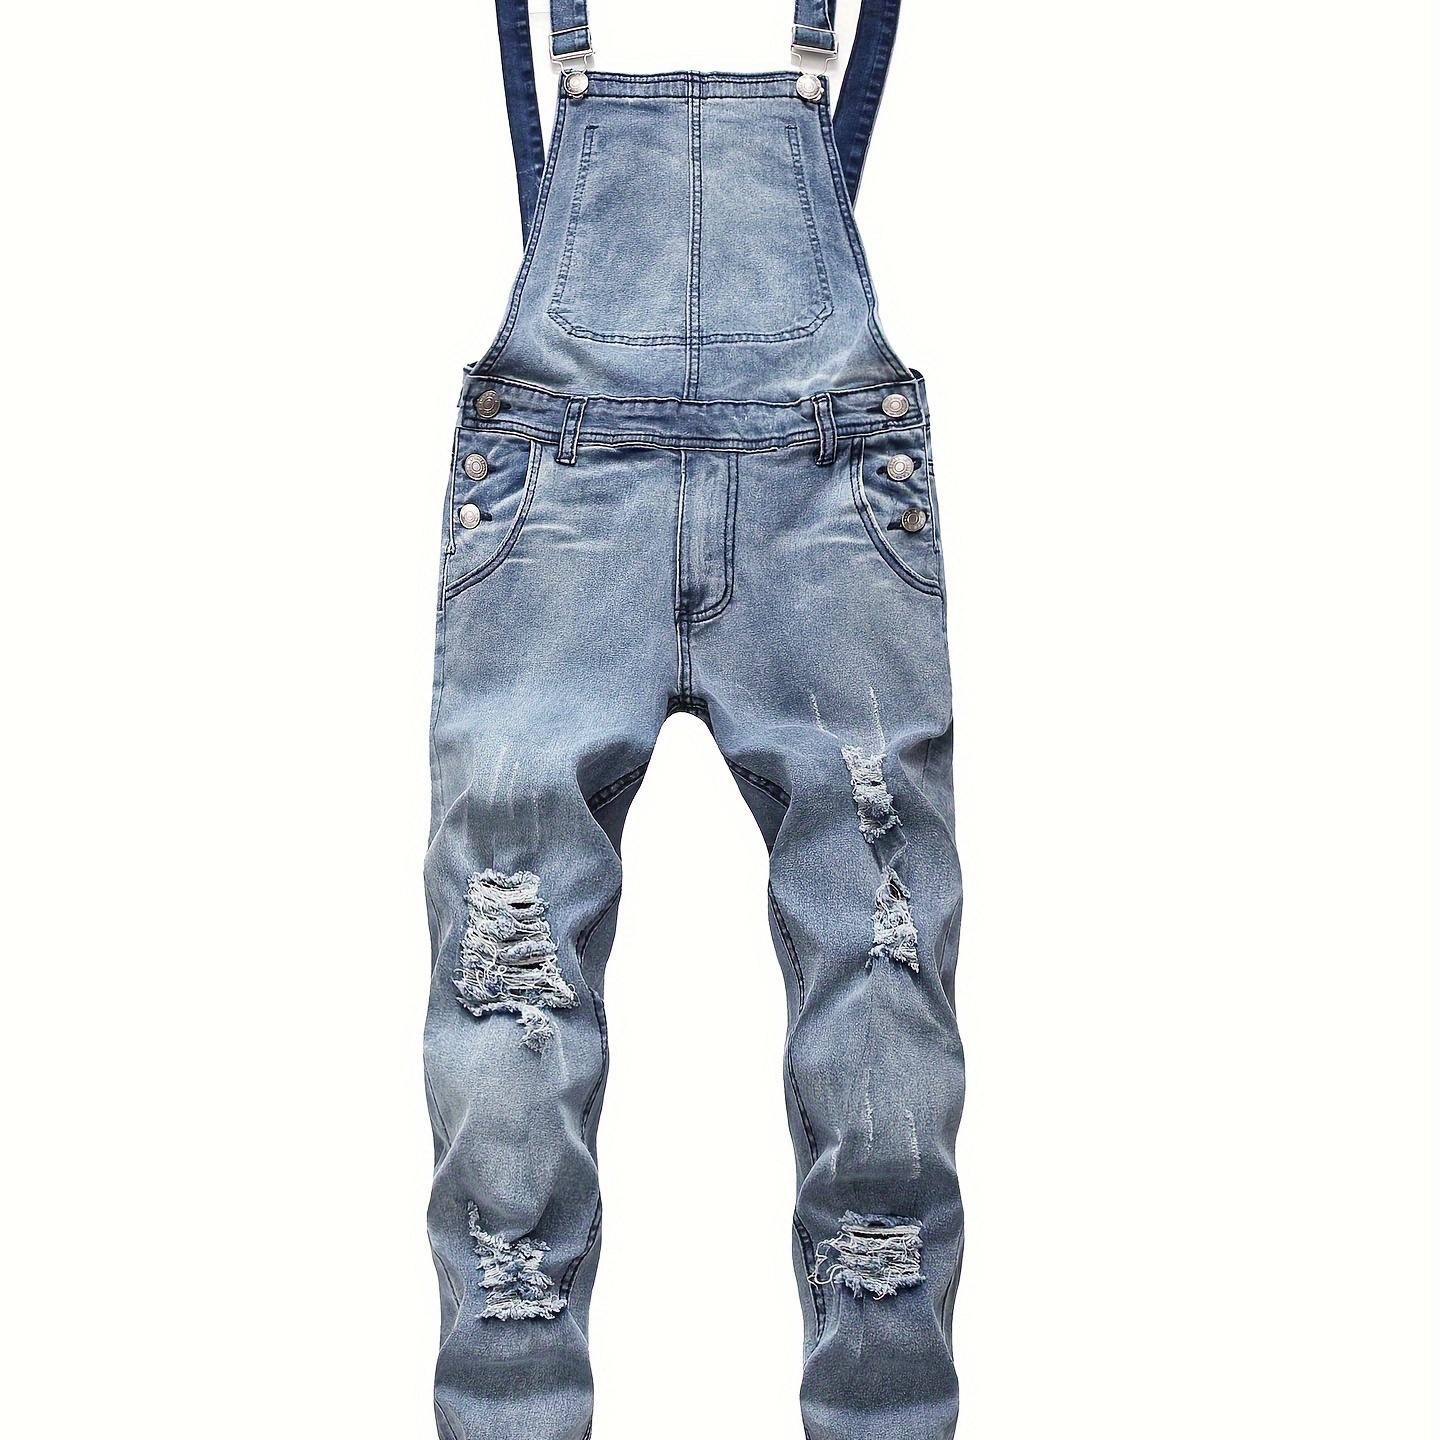 

Men's Fashion Ripped Distressed Denim Overalls, Long Pants With Adjustable Straps For Casual Daily Wear